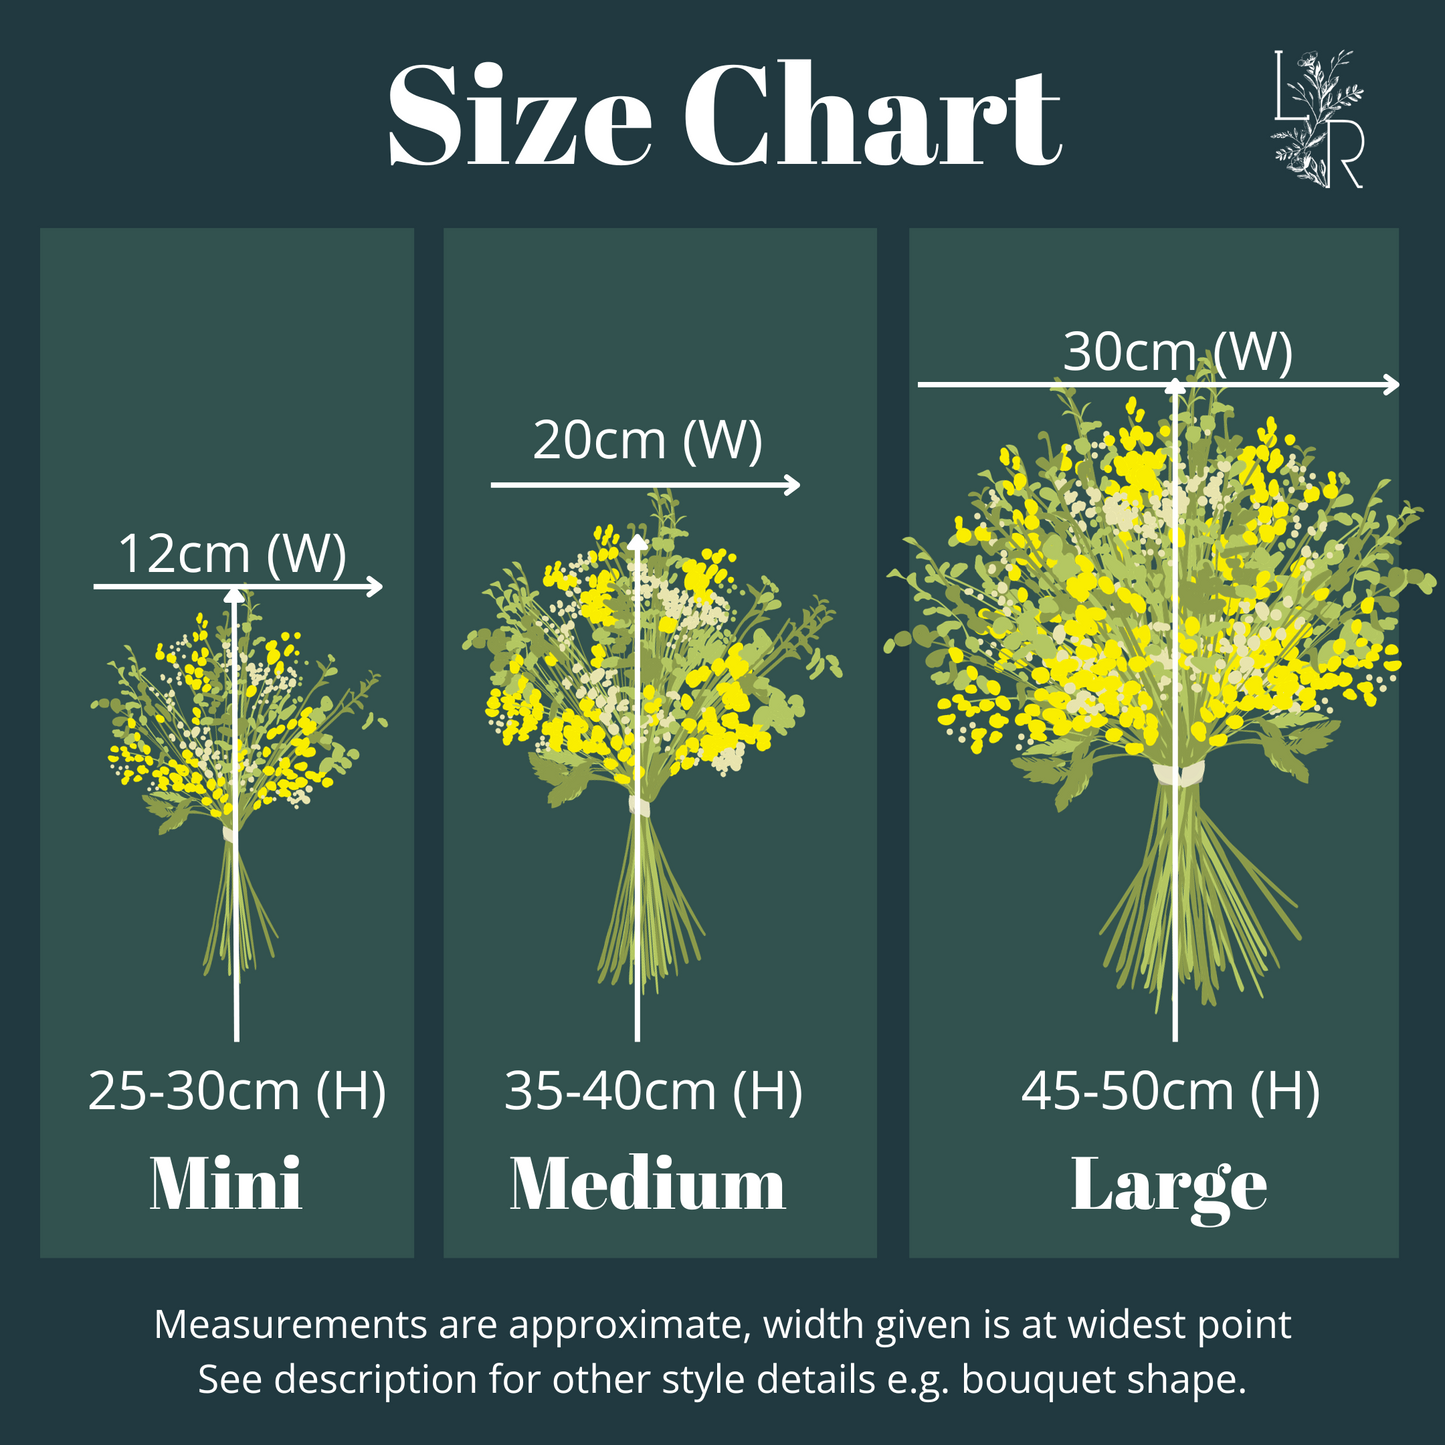 A size chart with illustrations showing the bouquet dimensions.  Medium size is shown to be 35-40cm tall and 20cm wide. The Large size is shown to be 45-50cm tall and 30 wide. The text under the images says the dimensions are taken at the widest points and are approximate.